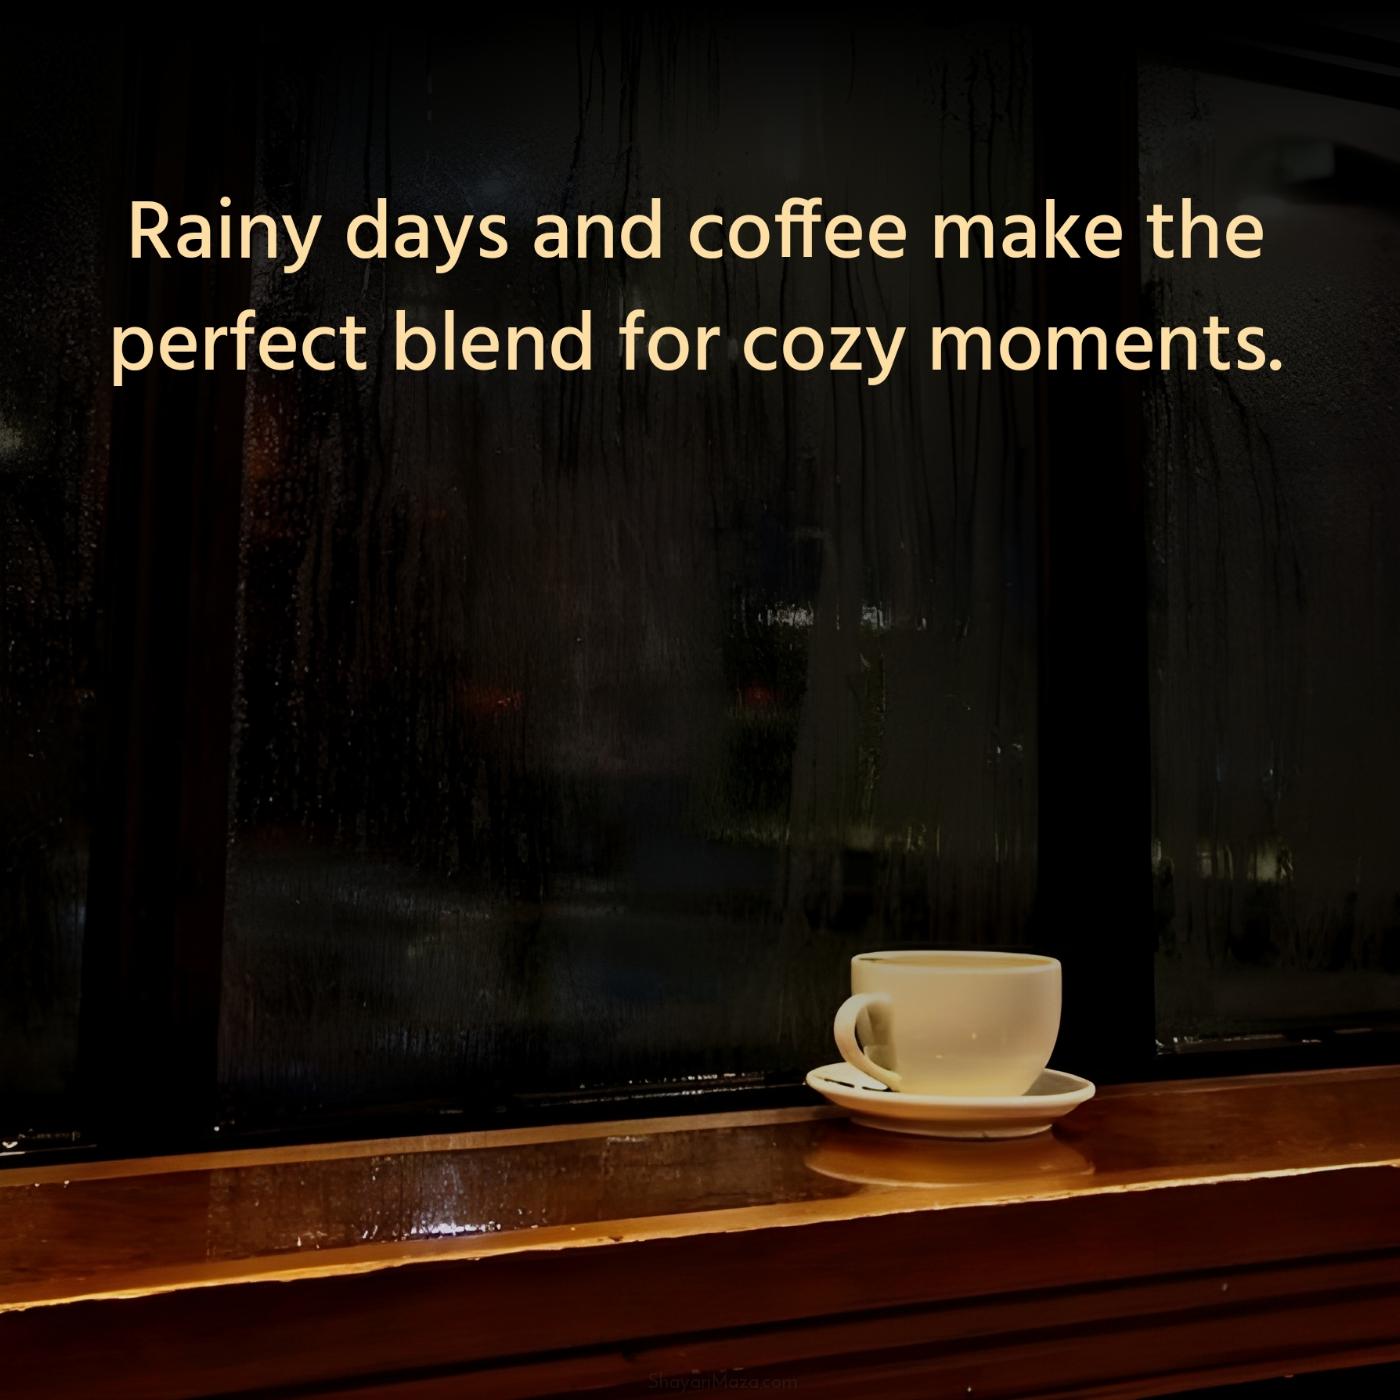 Rainy days and coffee make the perfect blend for cozy moments